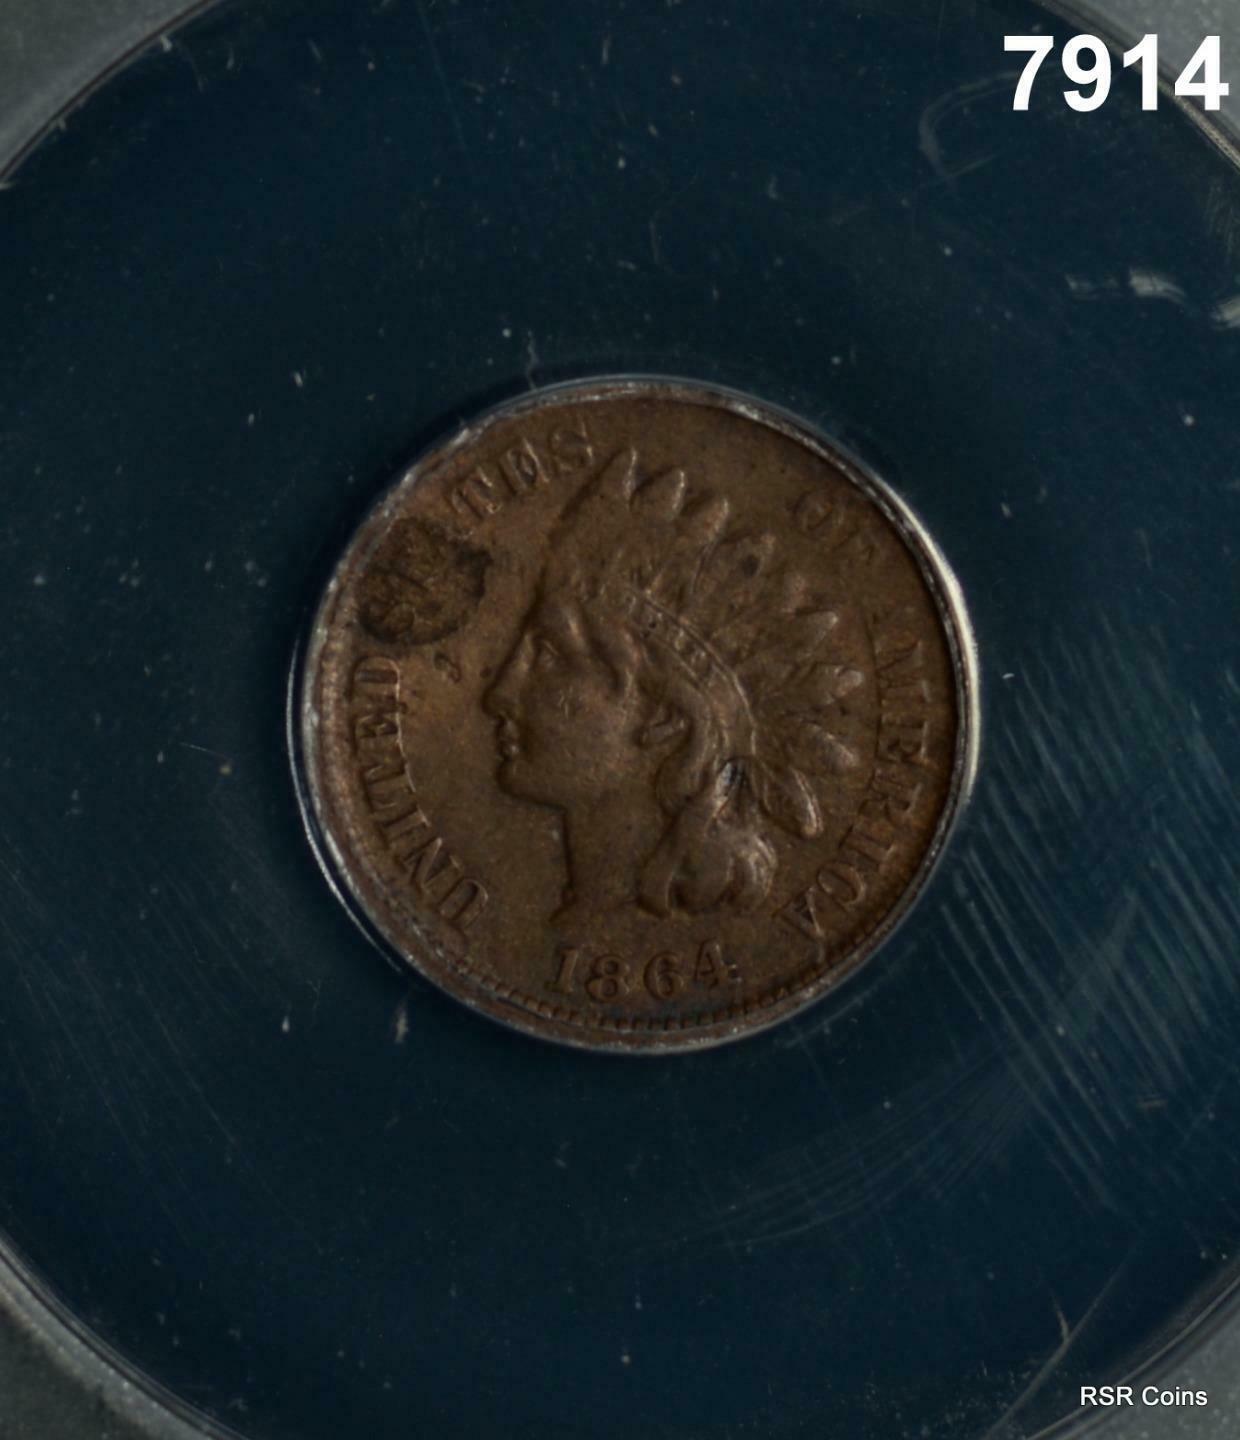 1864 INDIAN HEAD CENT WITH L ANACS CERTIFIED VF30 CORRODED #7914